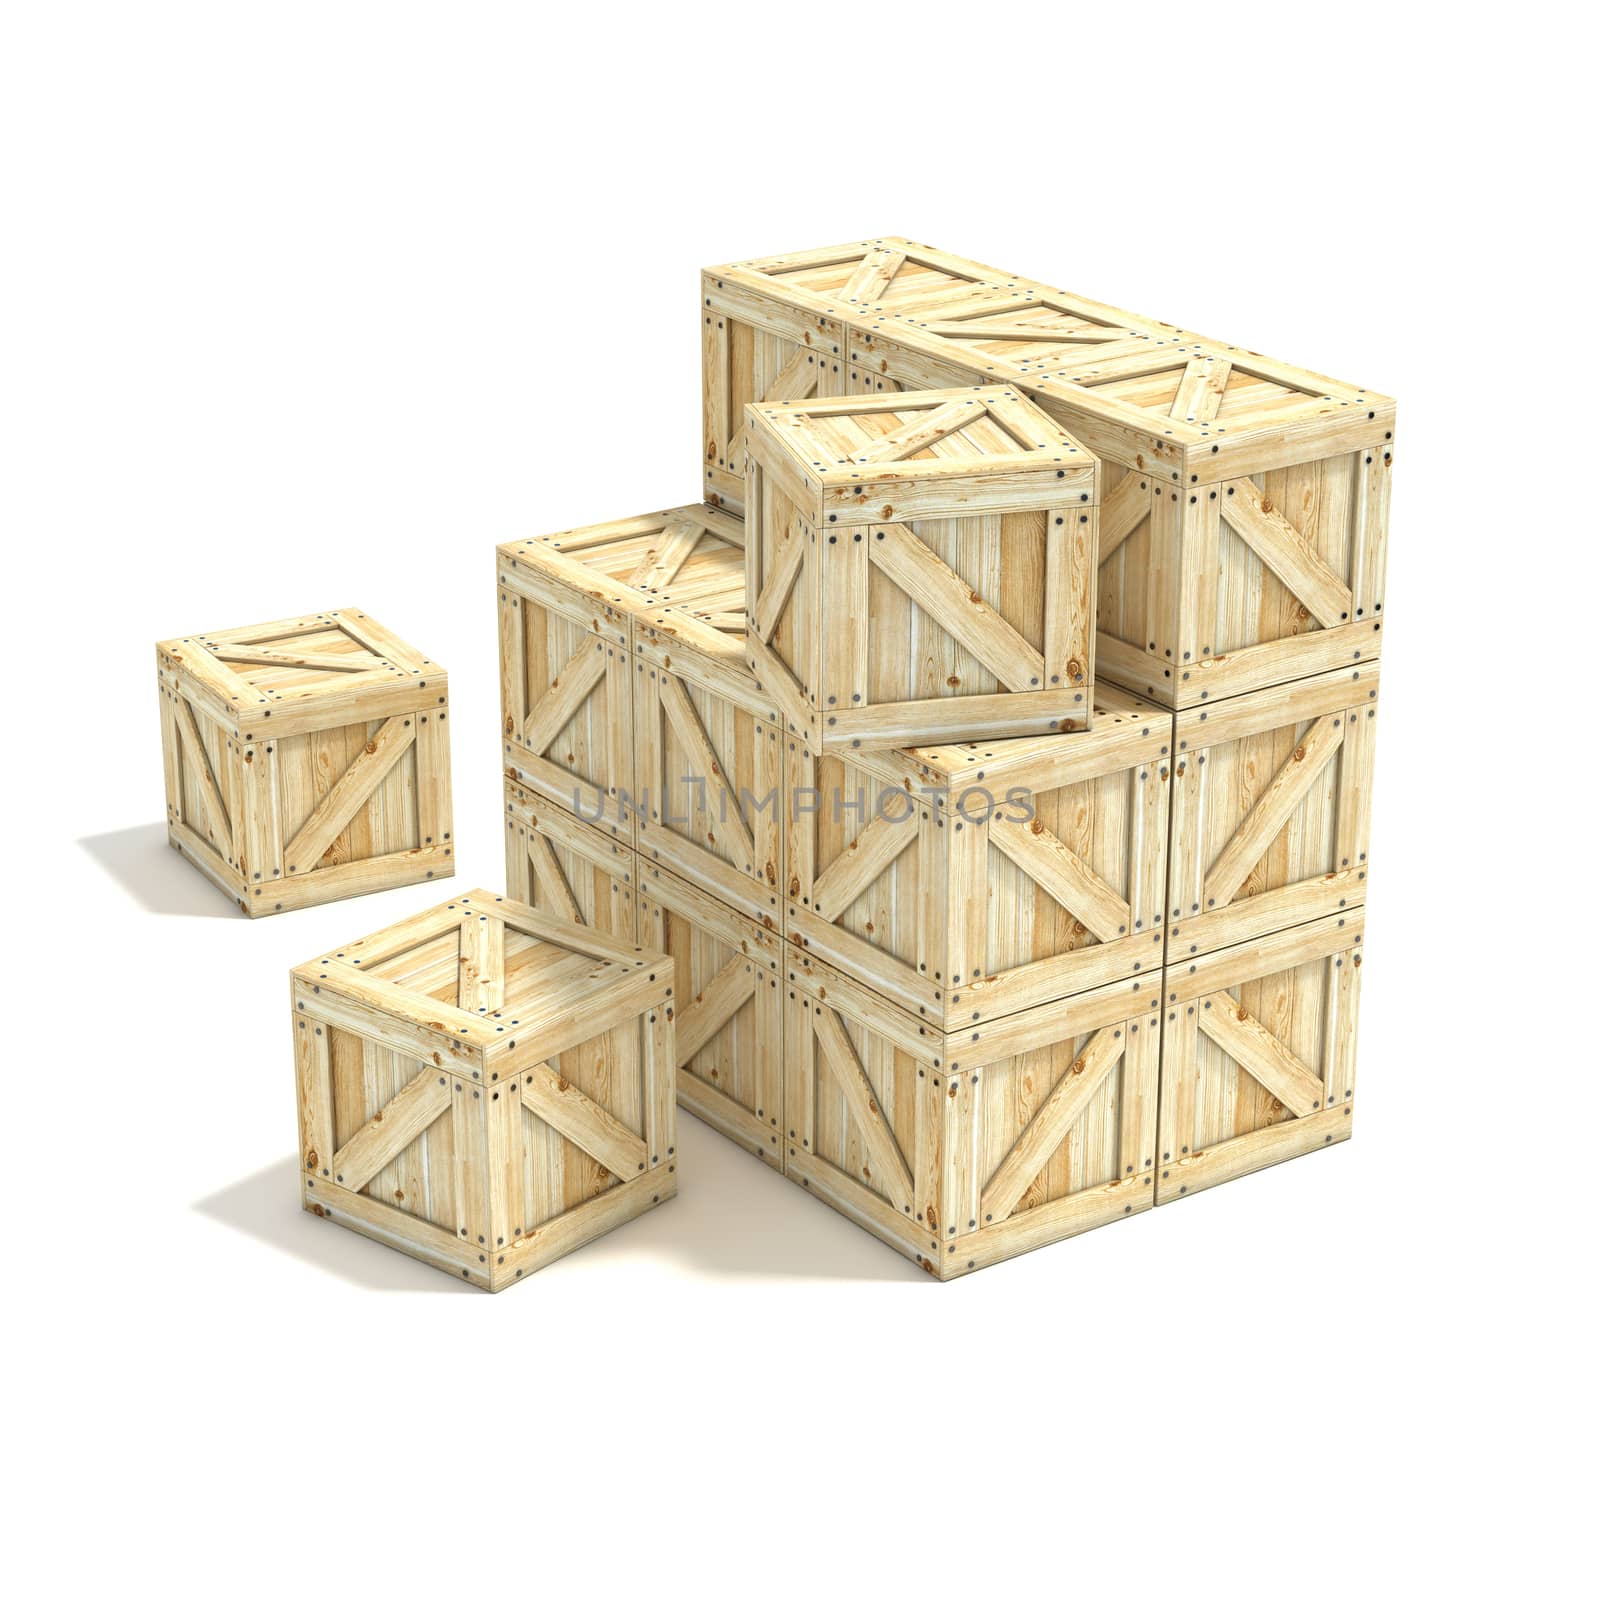 Wooden boxes. 3D render illustration isolated on a white background